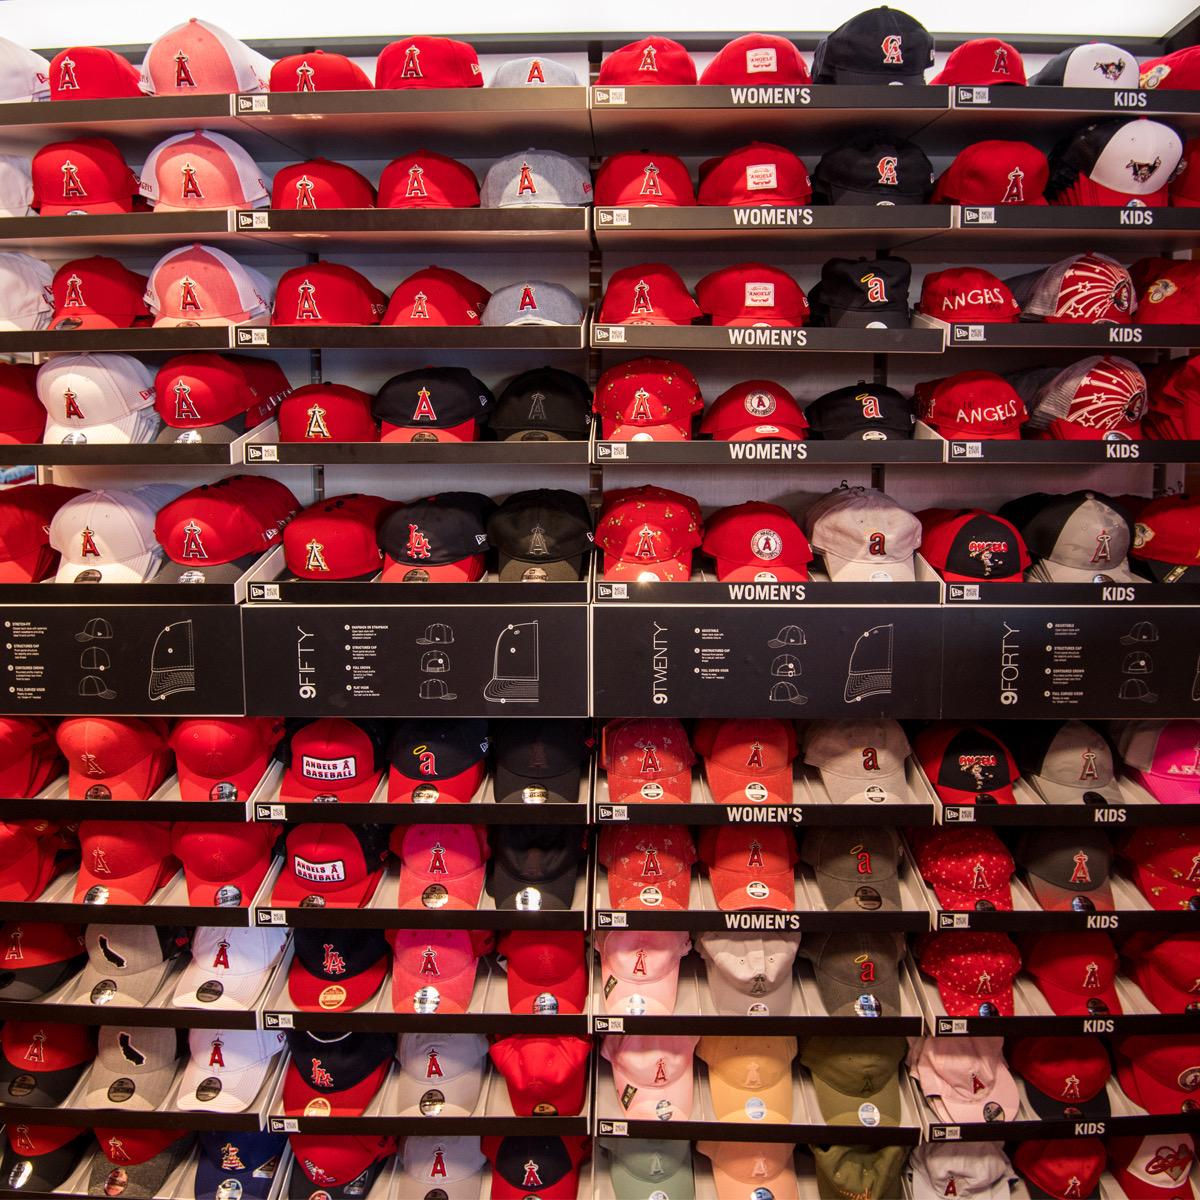 Los Angeles Angels on X: Cross the Angels fans off your gift list this  #BlackFriday by visiting the Angel Stadium Team Store! Savings include 40%  - 60% off the entire store, plus